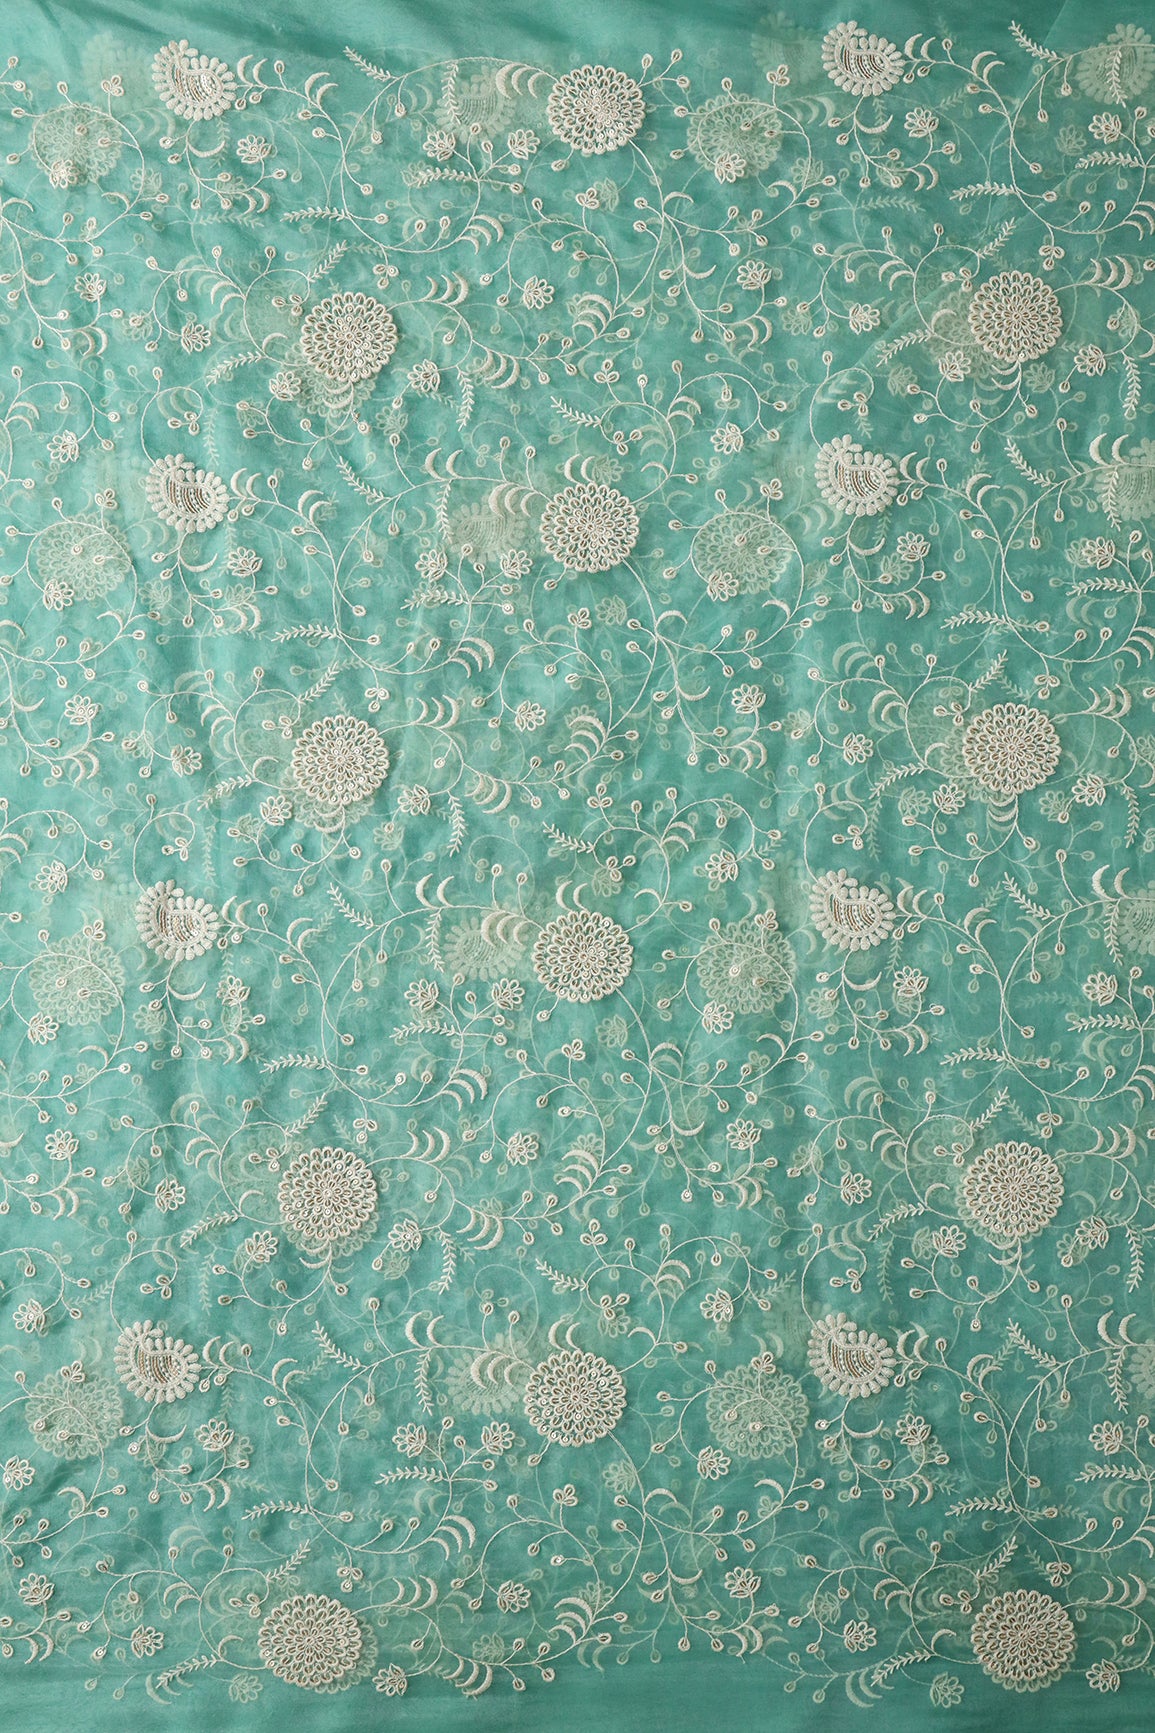 Exclusive Gold Matte Sequins With White Thread Floral Embroidery On Teal Organza Fabric